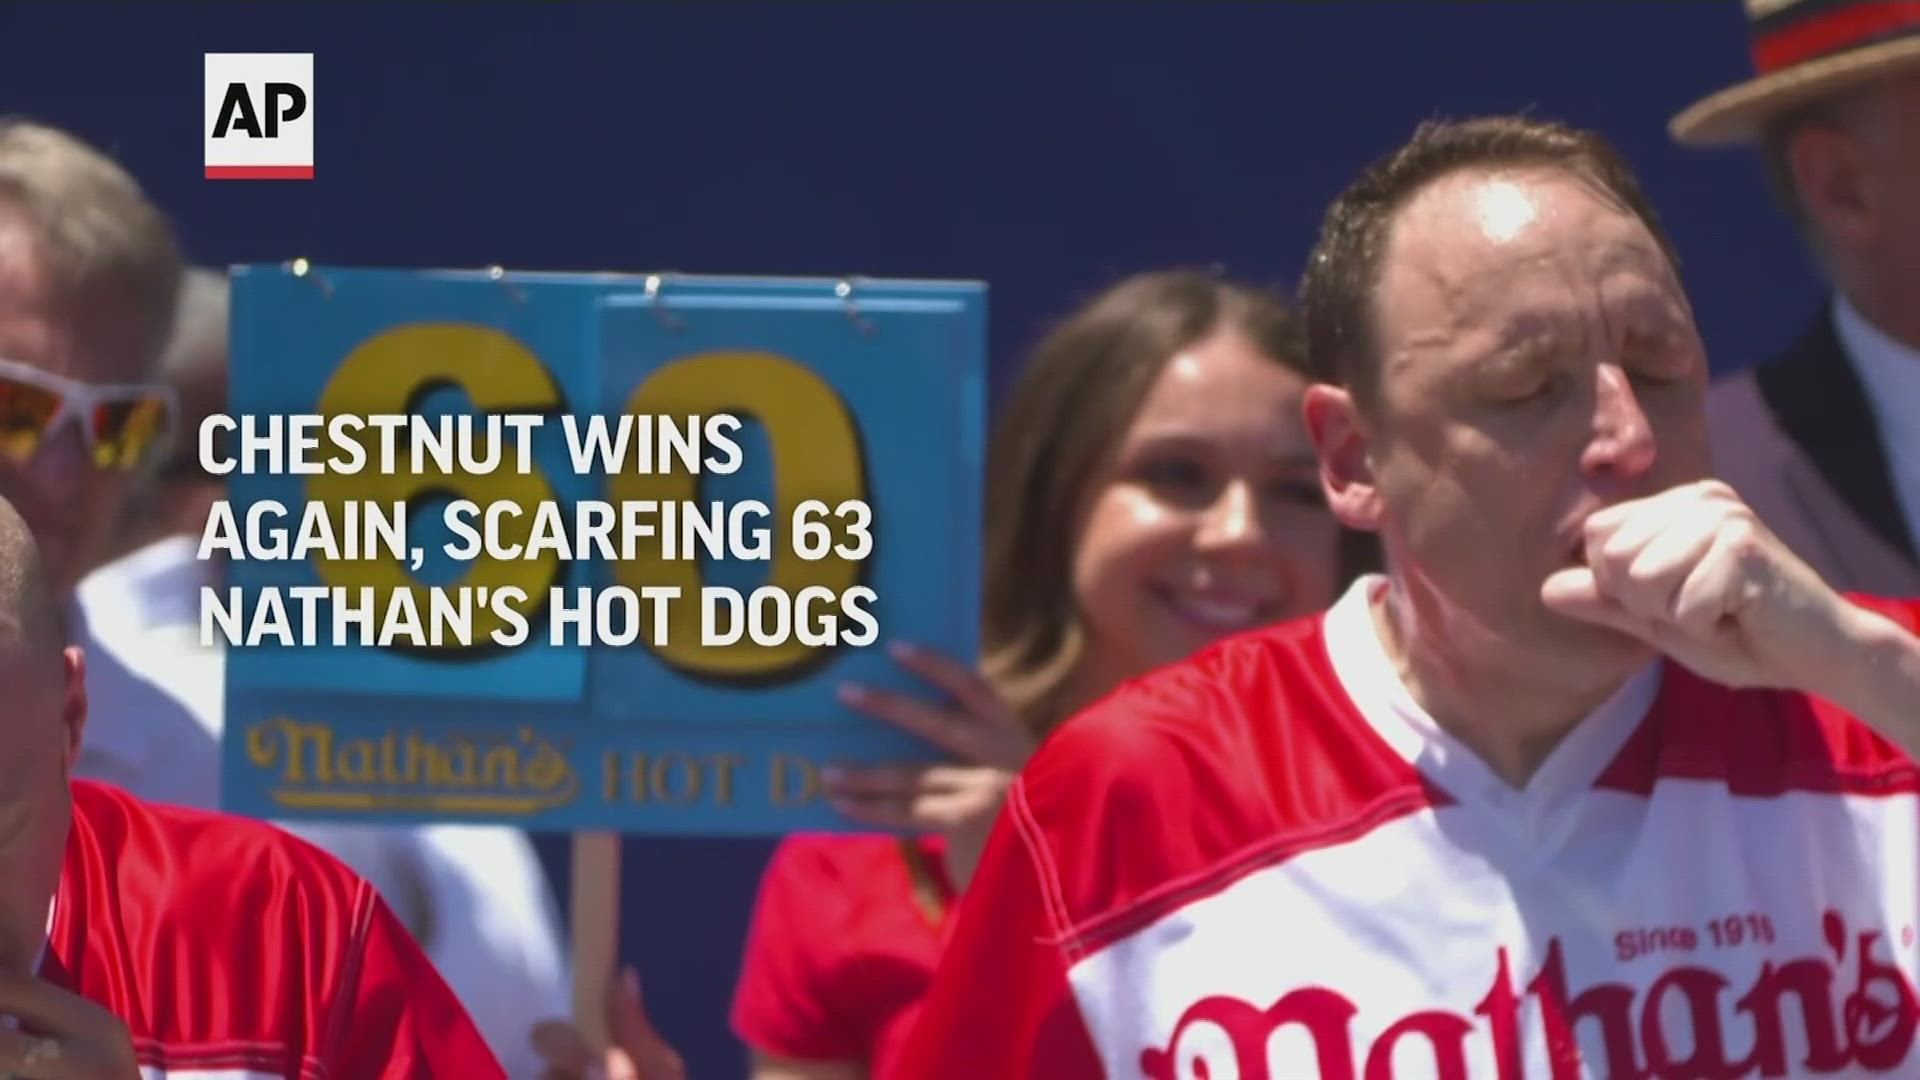 Joey "Jaws" Chestnut gobbled his way to a 15th win Monday at the Nathan's Famous Fourth of July hot dog eating contest.